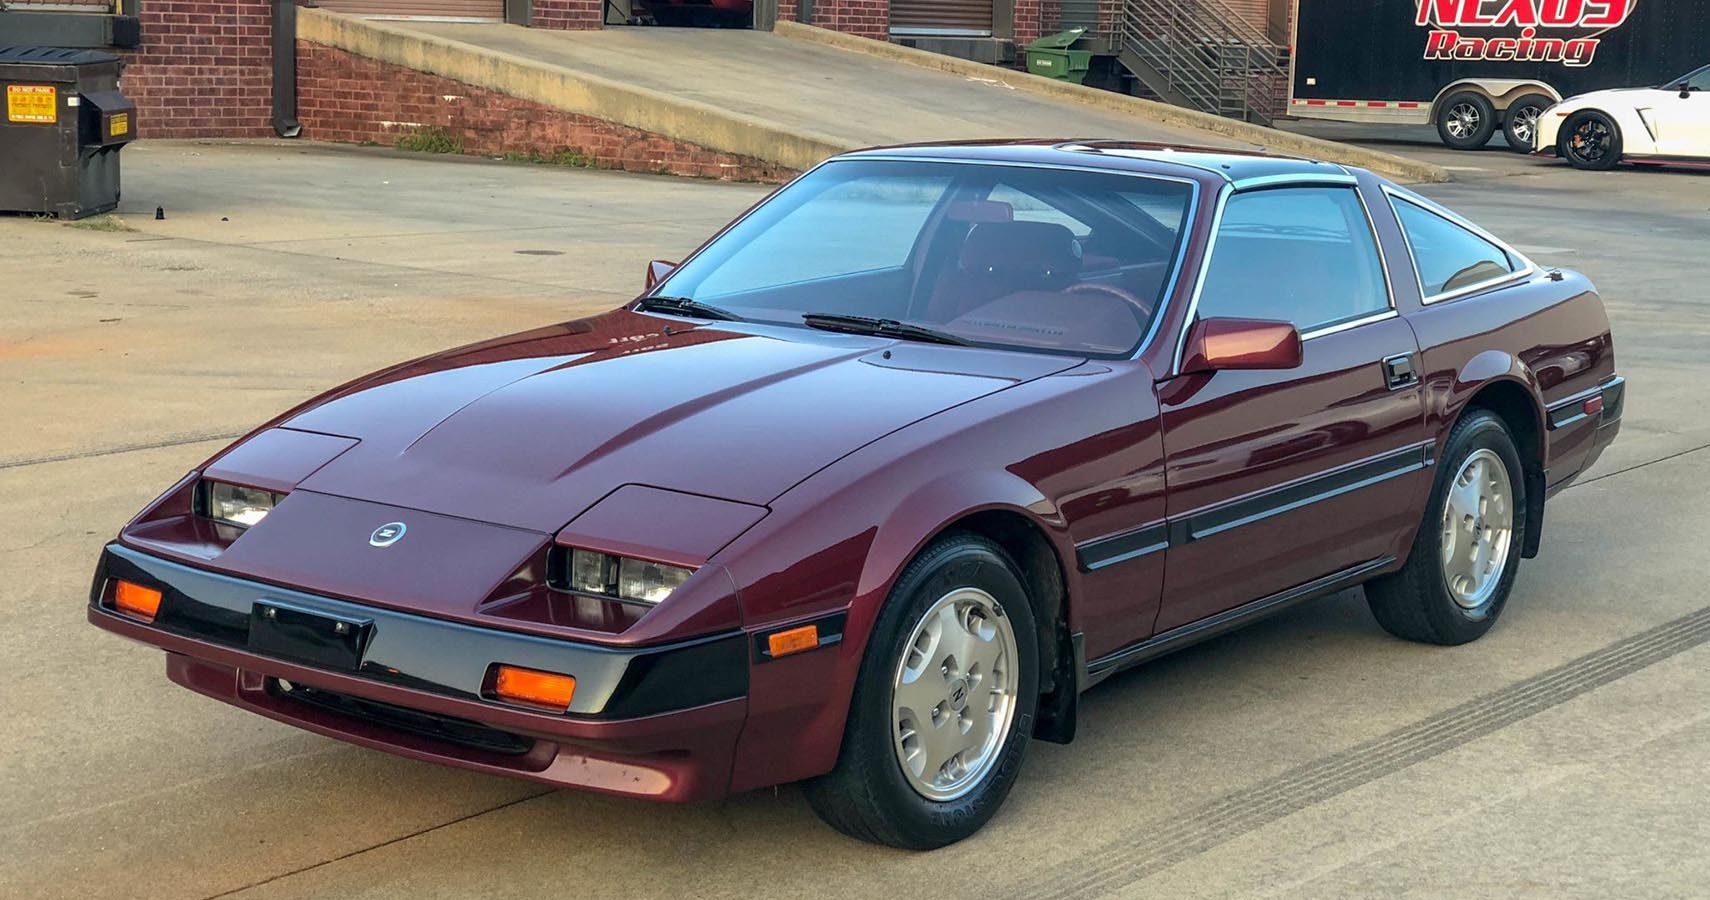 1984 Nissan Fairlady Z: Yours For $4,900